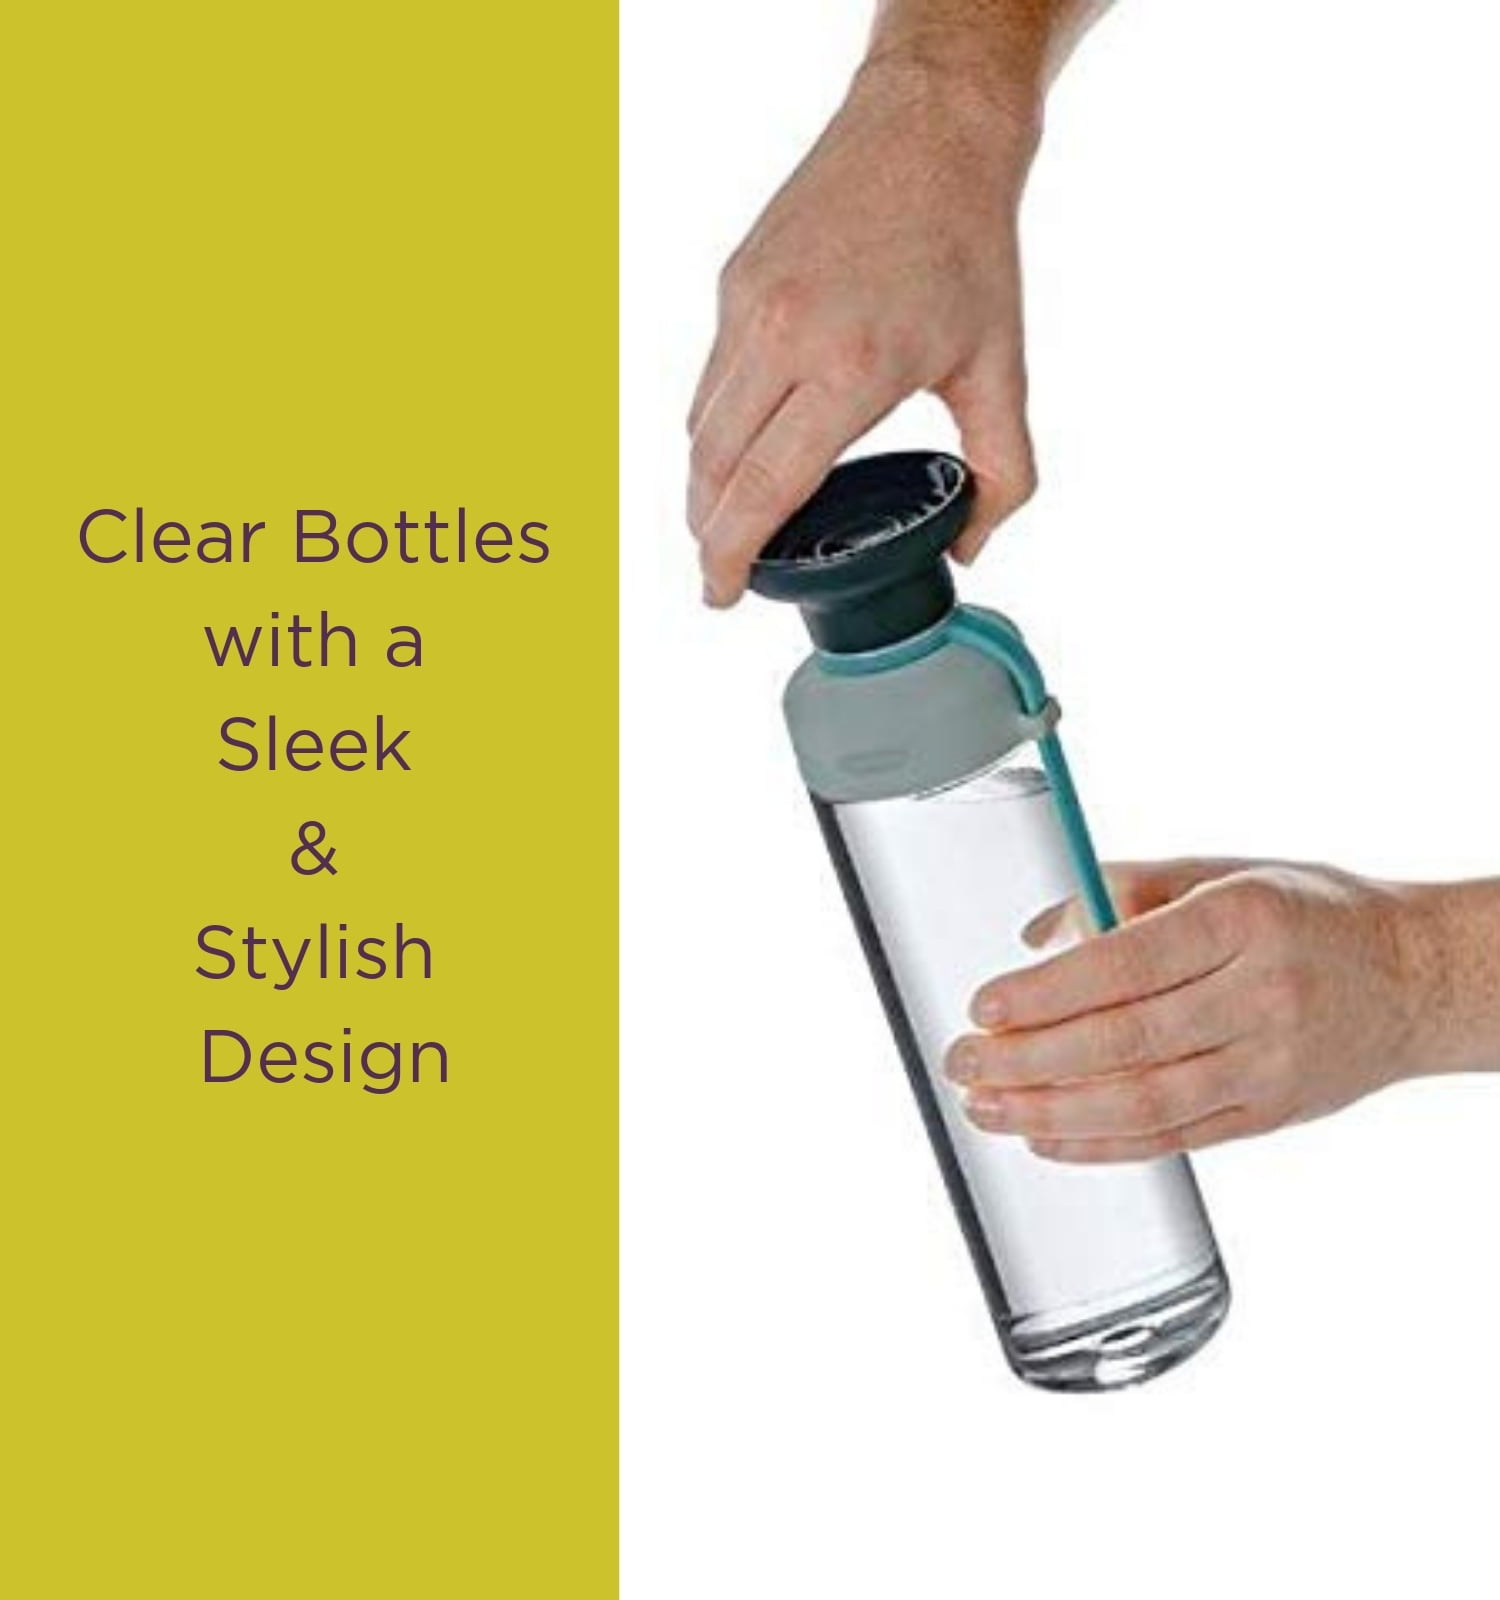 NEW @BrüMate Rotera Waterbottle allows a germ free hydration routine!